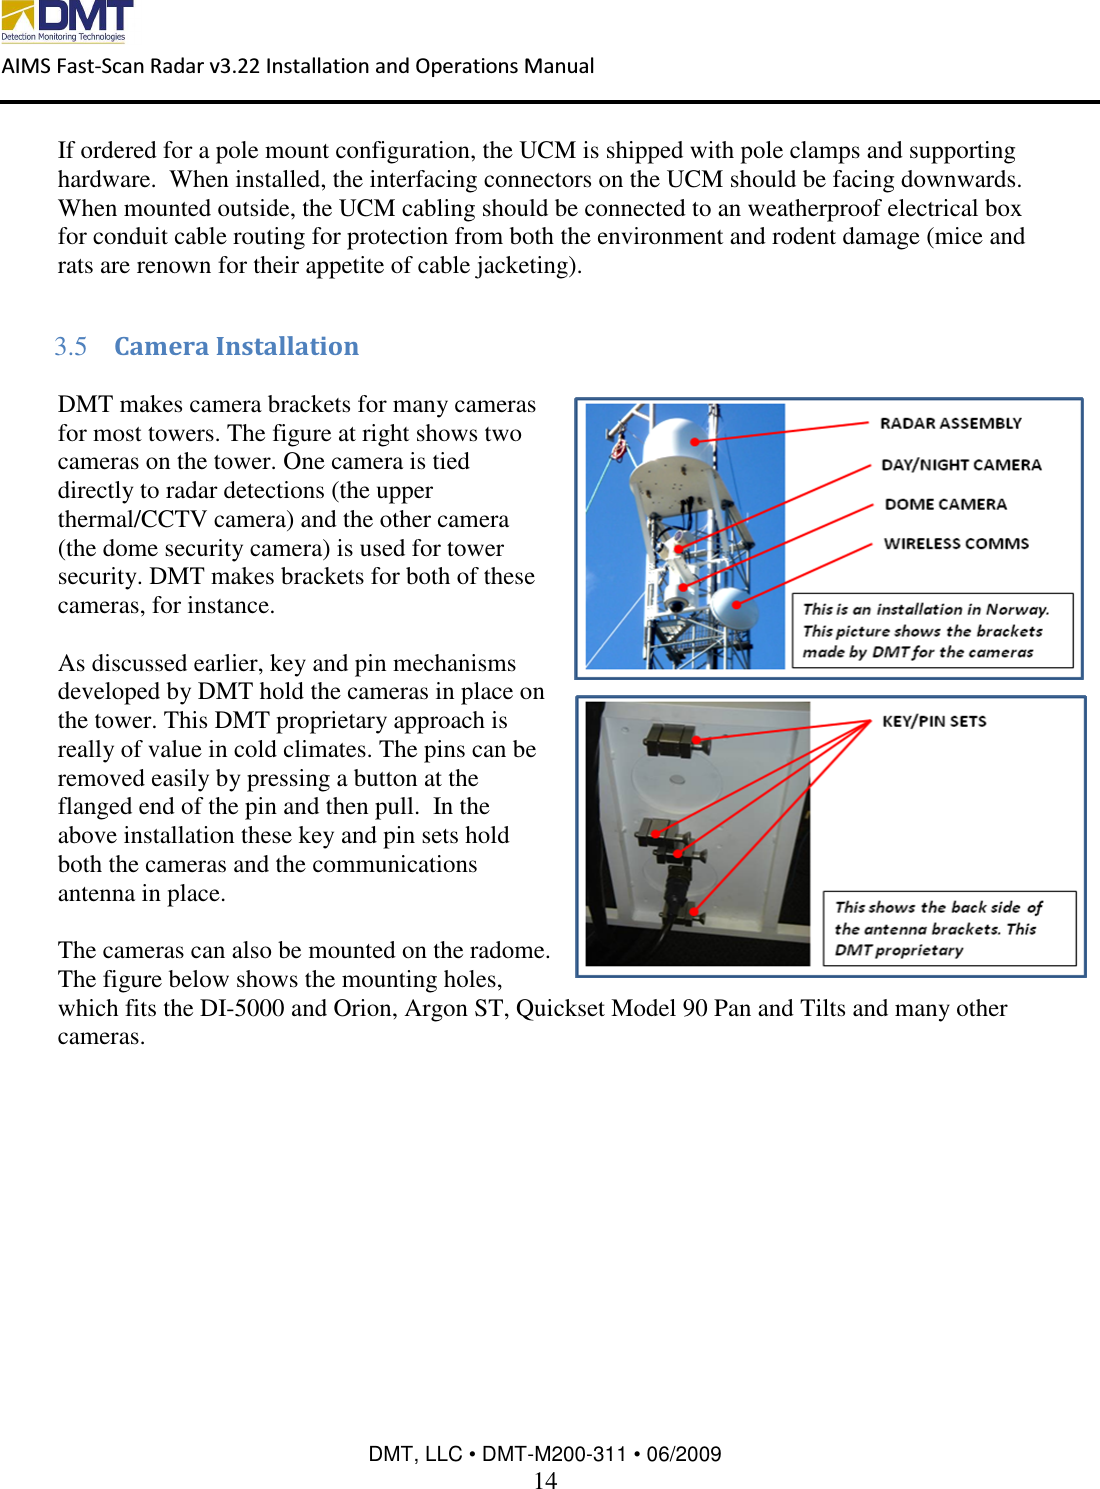  AIMS Fast-Scan Radar v3.22 Installation and Operations Manual    DMT, LLC • DMT-M200-311 • 06/2009 14  If ordered for a pole mount configuration, the UCM is shipped with pole clamps and supporting hardware.  When installed, the interfacing connectors on the UCM should be facing downwards.  When mounted outside, the UCM cabling should be connected to an weatherproof electrical box for conduit cable routing for protection from both the environment and rodent damage (mice and rats are renown for their appetite of cable jacketing).  3.5 Camera Installation  DMT makes camera brackets for many cameras for most towers. The figure at right shows two cameras on the tower. One camera is tied directly to radar detections (the upper thermal/CCTV camera) and the other camera (the dome security camera) is used for tower security. DMT makes brackets for both of these cameras, for instance.   As discussed earlier, key and pin mechanisms developed by DMT hold the cameras in place on the tower. This DMT proprietary approach is really of value in cold climates. The pins can be removed easily by pressing a button at the flanged end of the pin and then pull.  In the above installation these key and pin sets hold both the cameras and the communications antenna in place.   The cameras can also be mounted on the radome. The figure below shows the mounting holes, which fits the DI-5000 and Orion, Argon ST, Quickset Model 90 Pan and Tilts and many other cameras.  